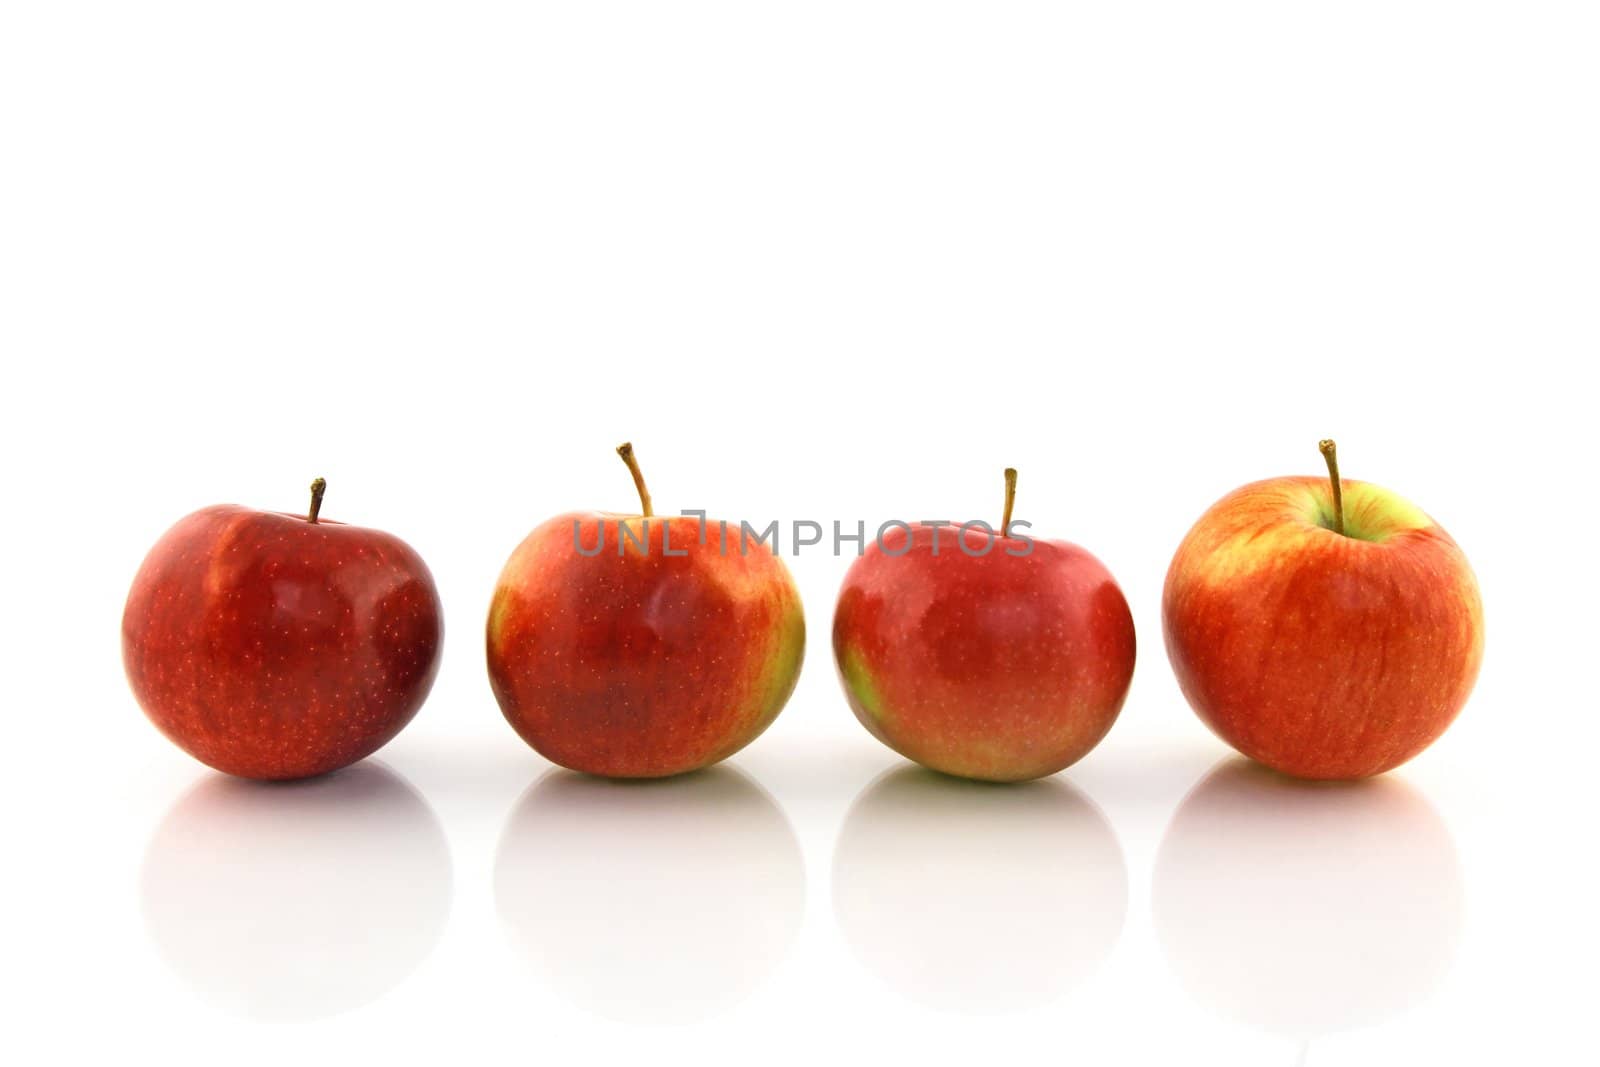 Four red apples in a row, reflecting on white background.